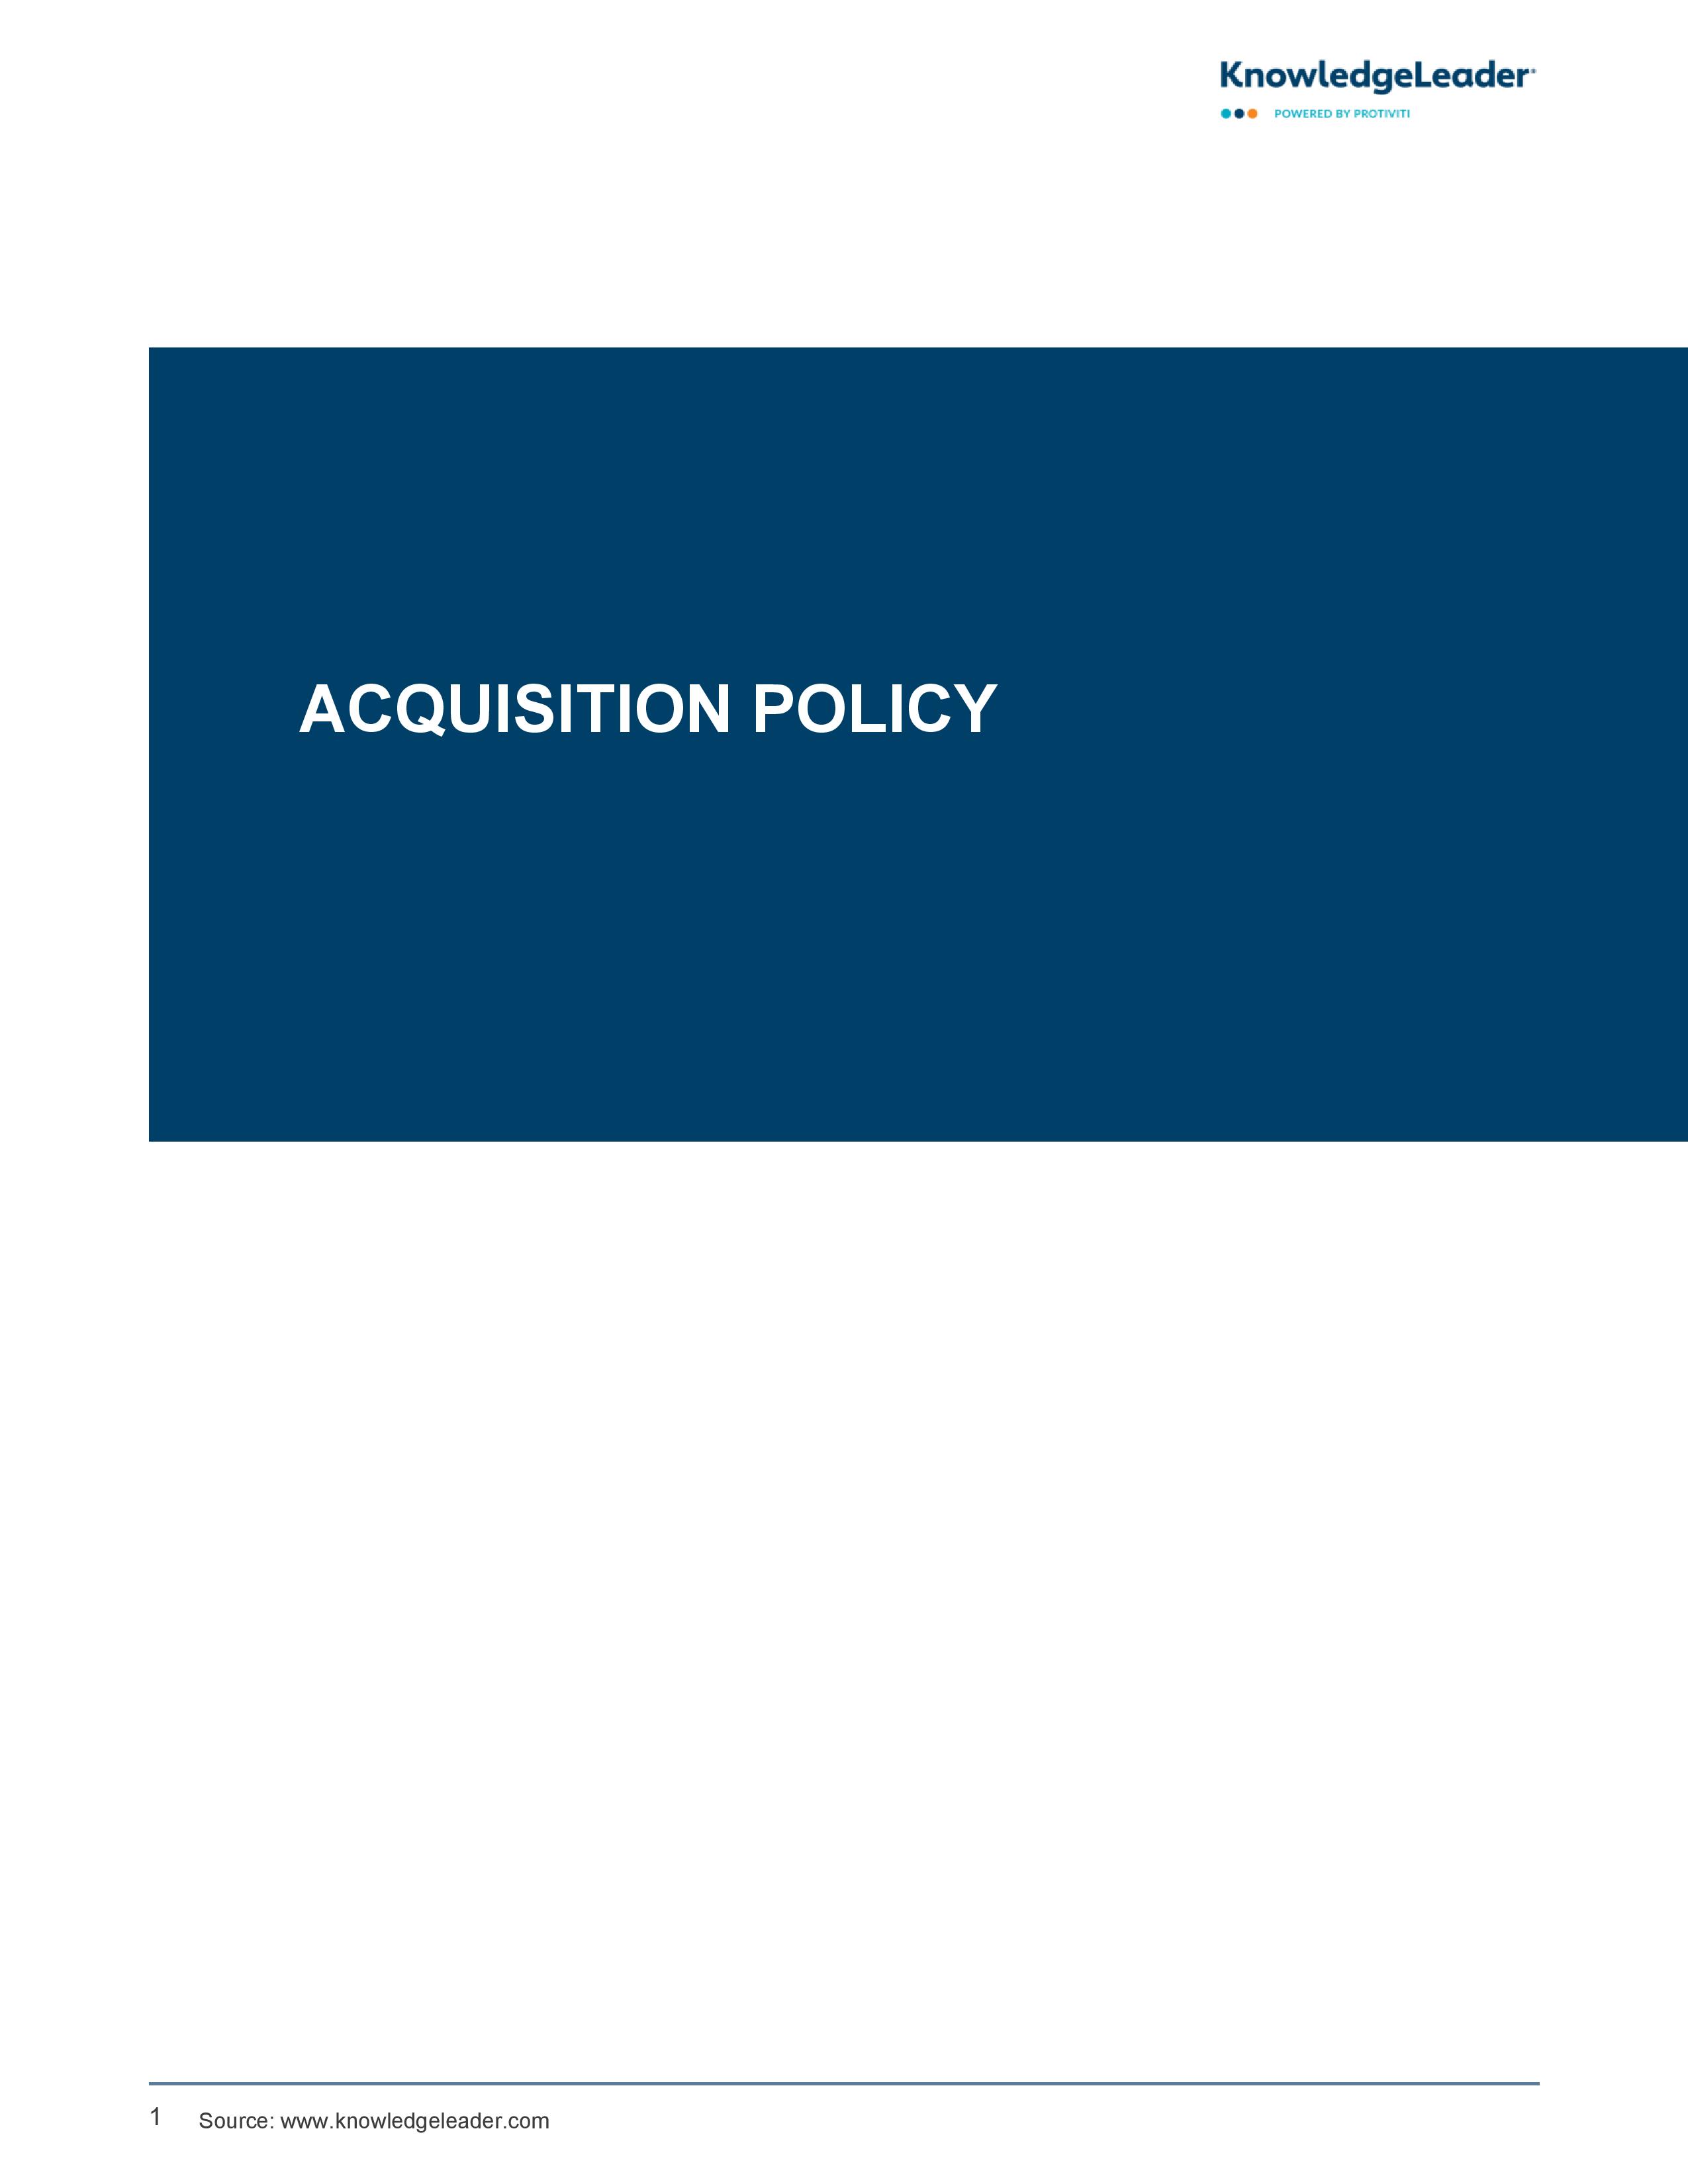 Screenshot of the first page of Acquisition Policy